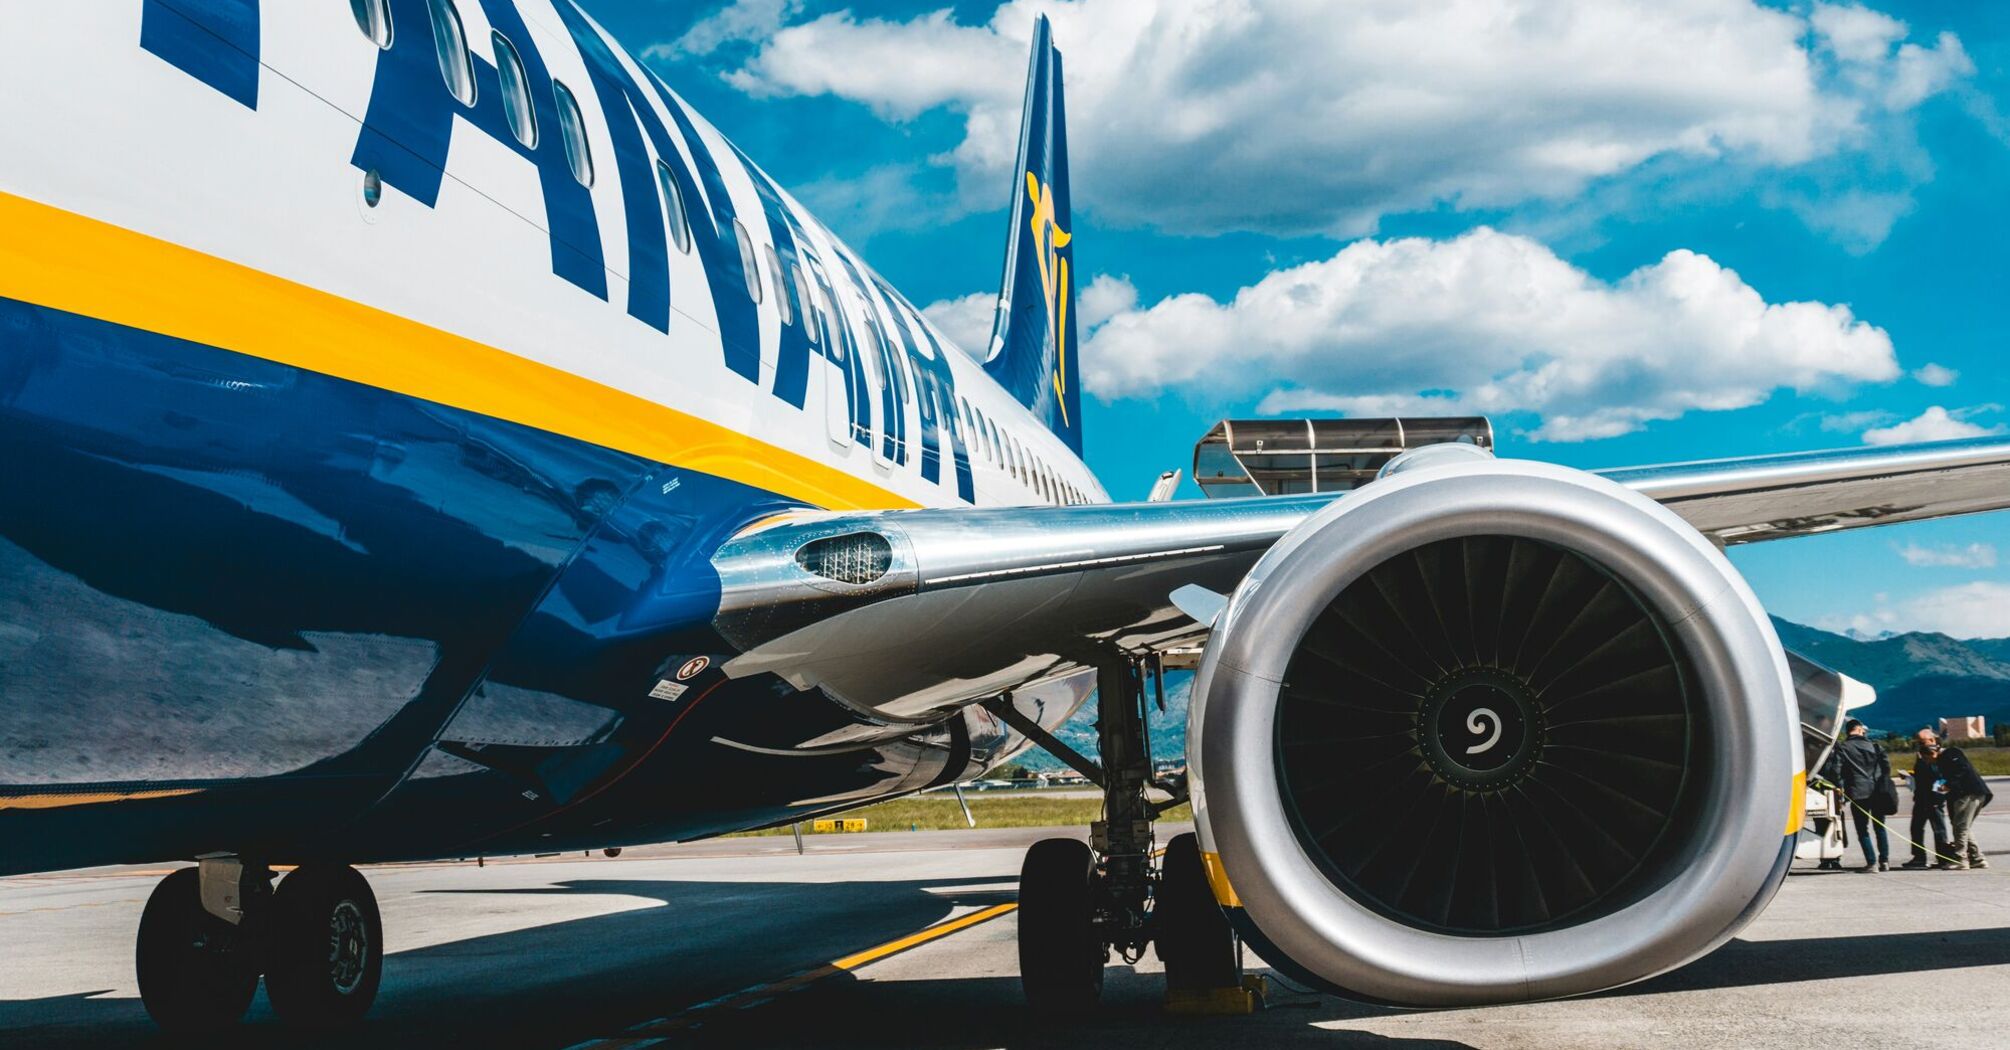 A Ryanair aircraft on the tarmac, showcasing the company's distinct yellow and blue livery